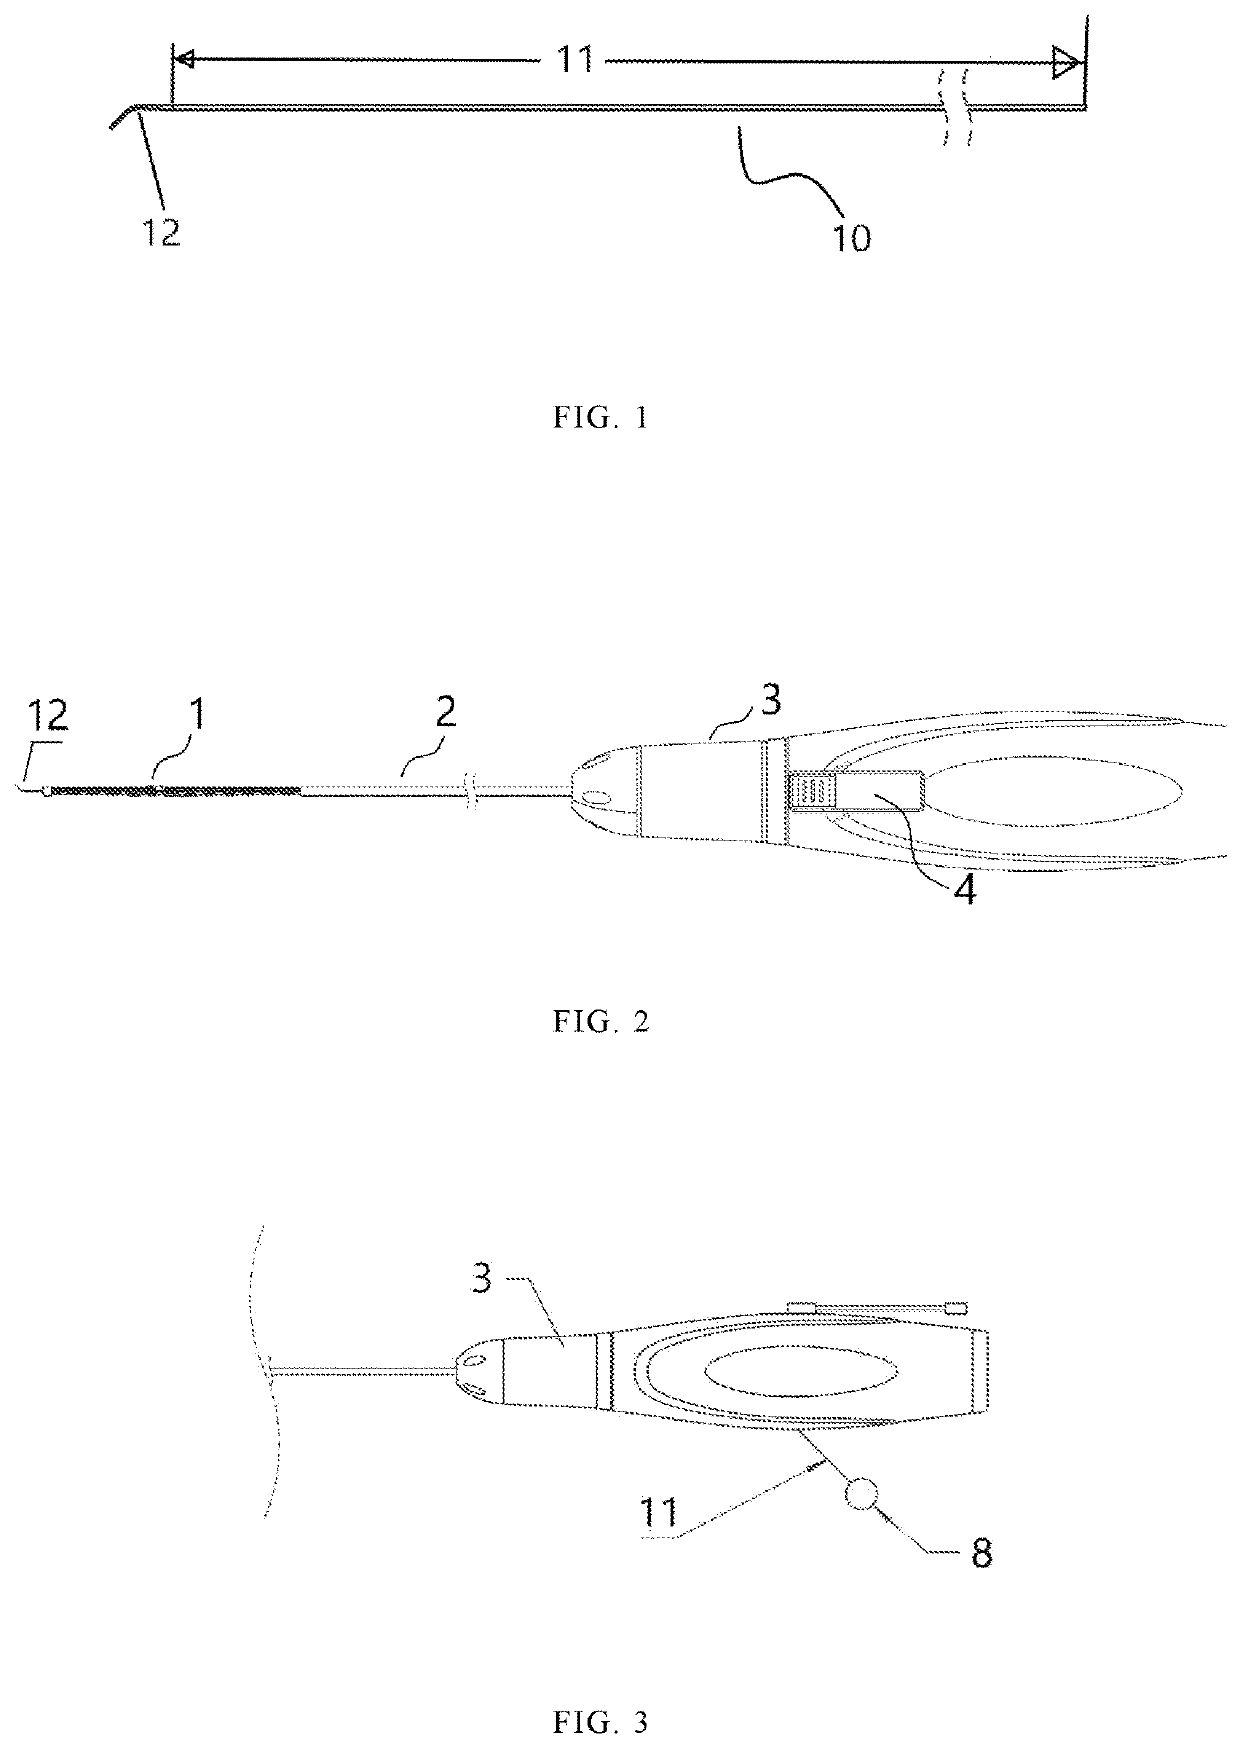 Radio frequency ablation catheter having function of moving guide wire